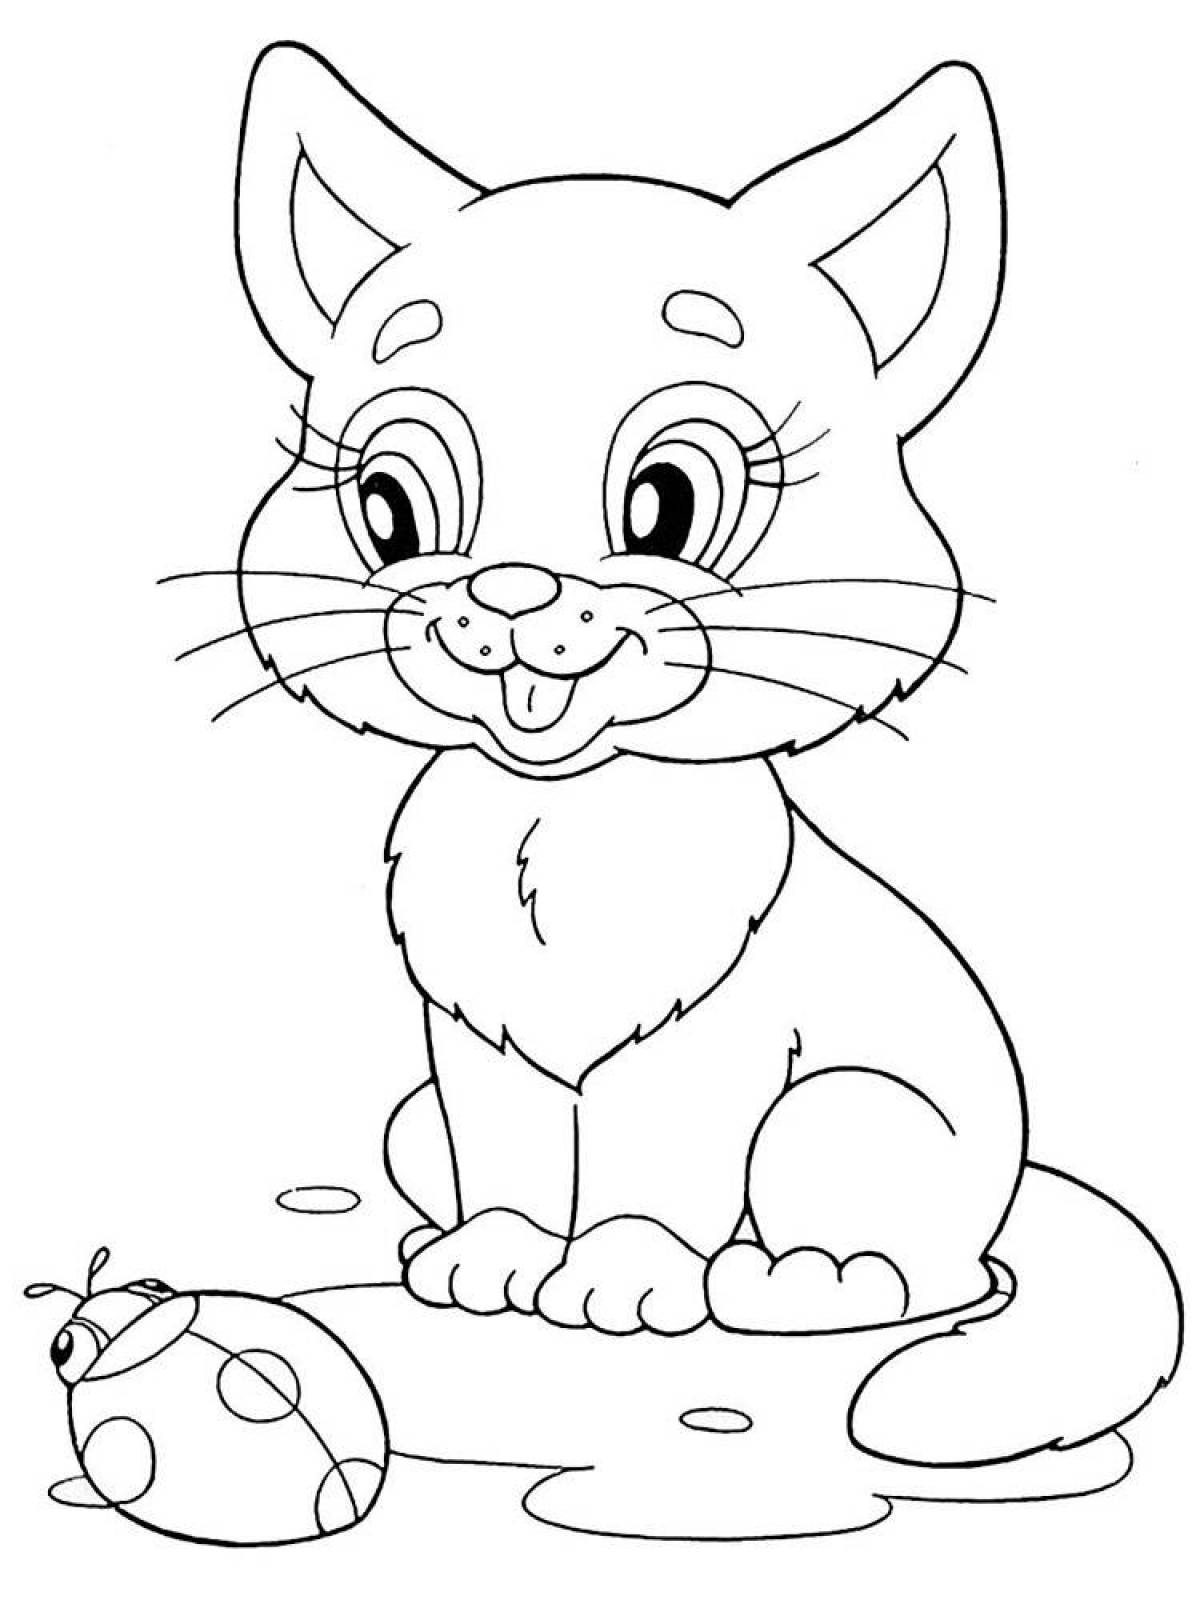 Color-blast coloring pages animals for children 5-7 years old